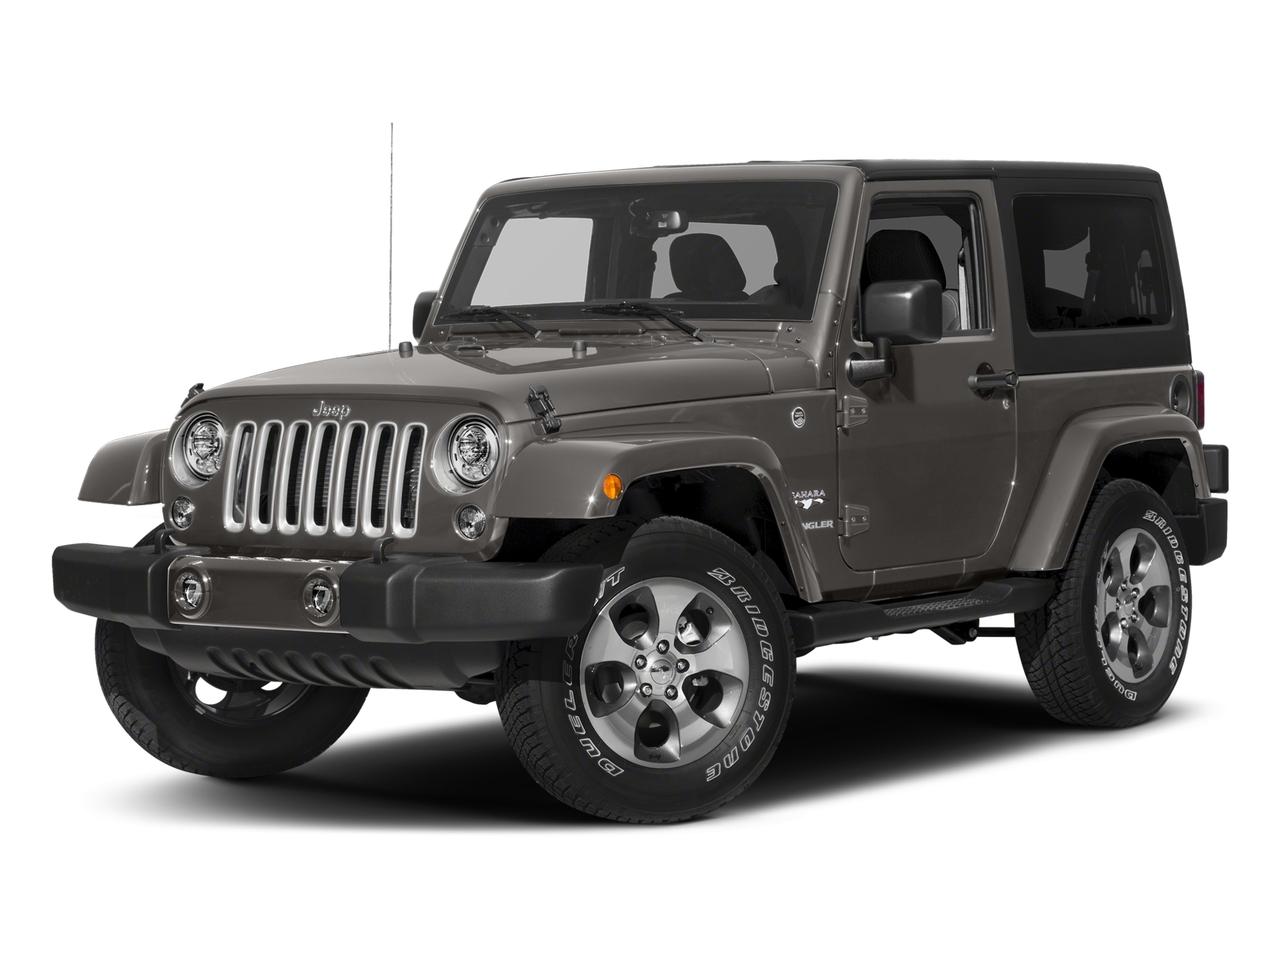 2018 Jeep Wrangler JK Vehicle Photo in Weatherford, TX 76087